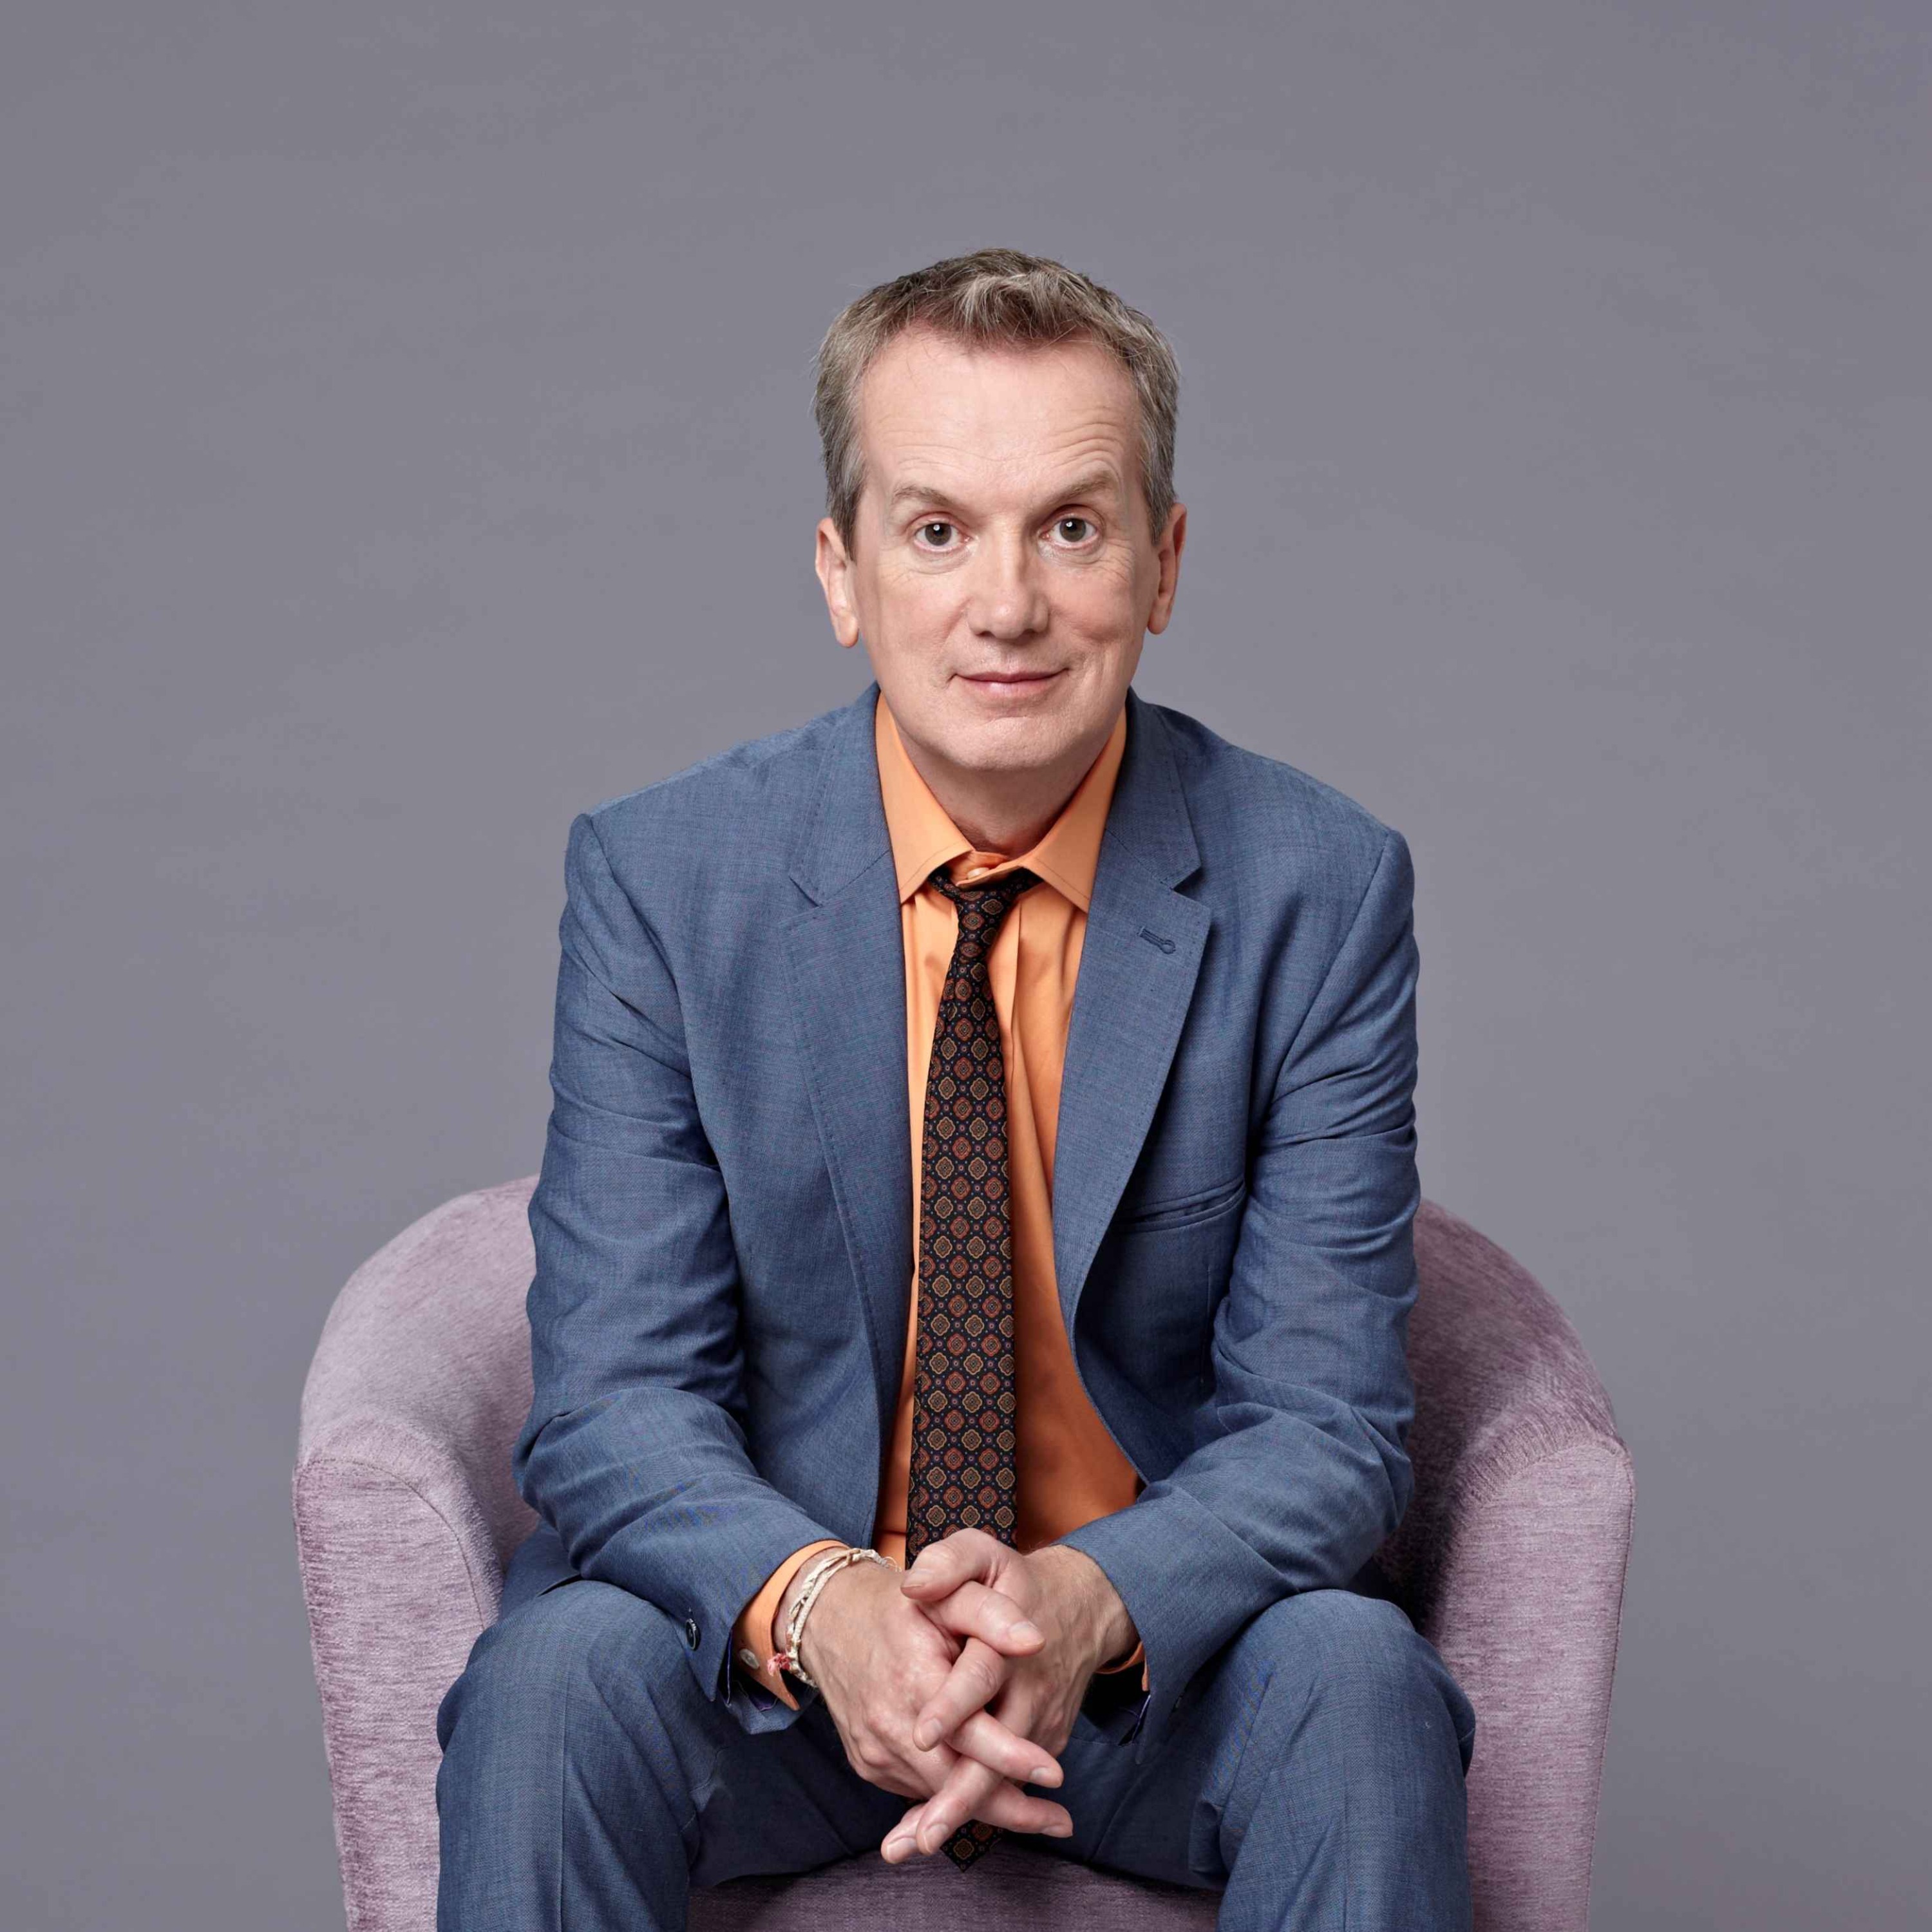 Frank Skinner on David Baddiel's porn collection and creating Fantasy  Football - Almost Famous | Lyssna hÃ¤r | Poddtoppen.se